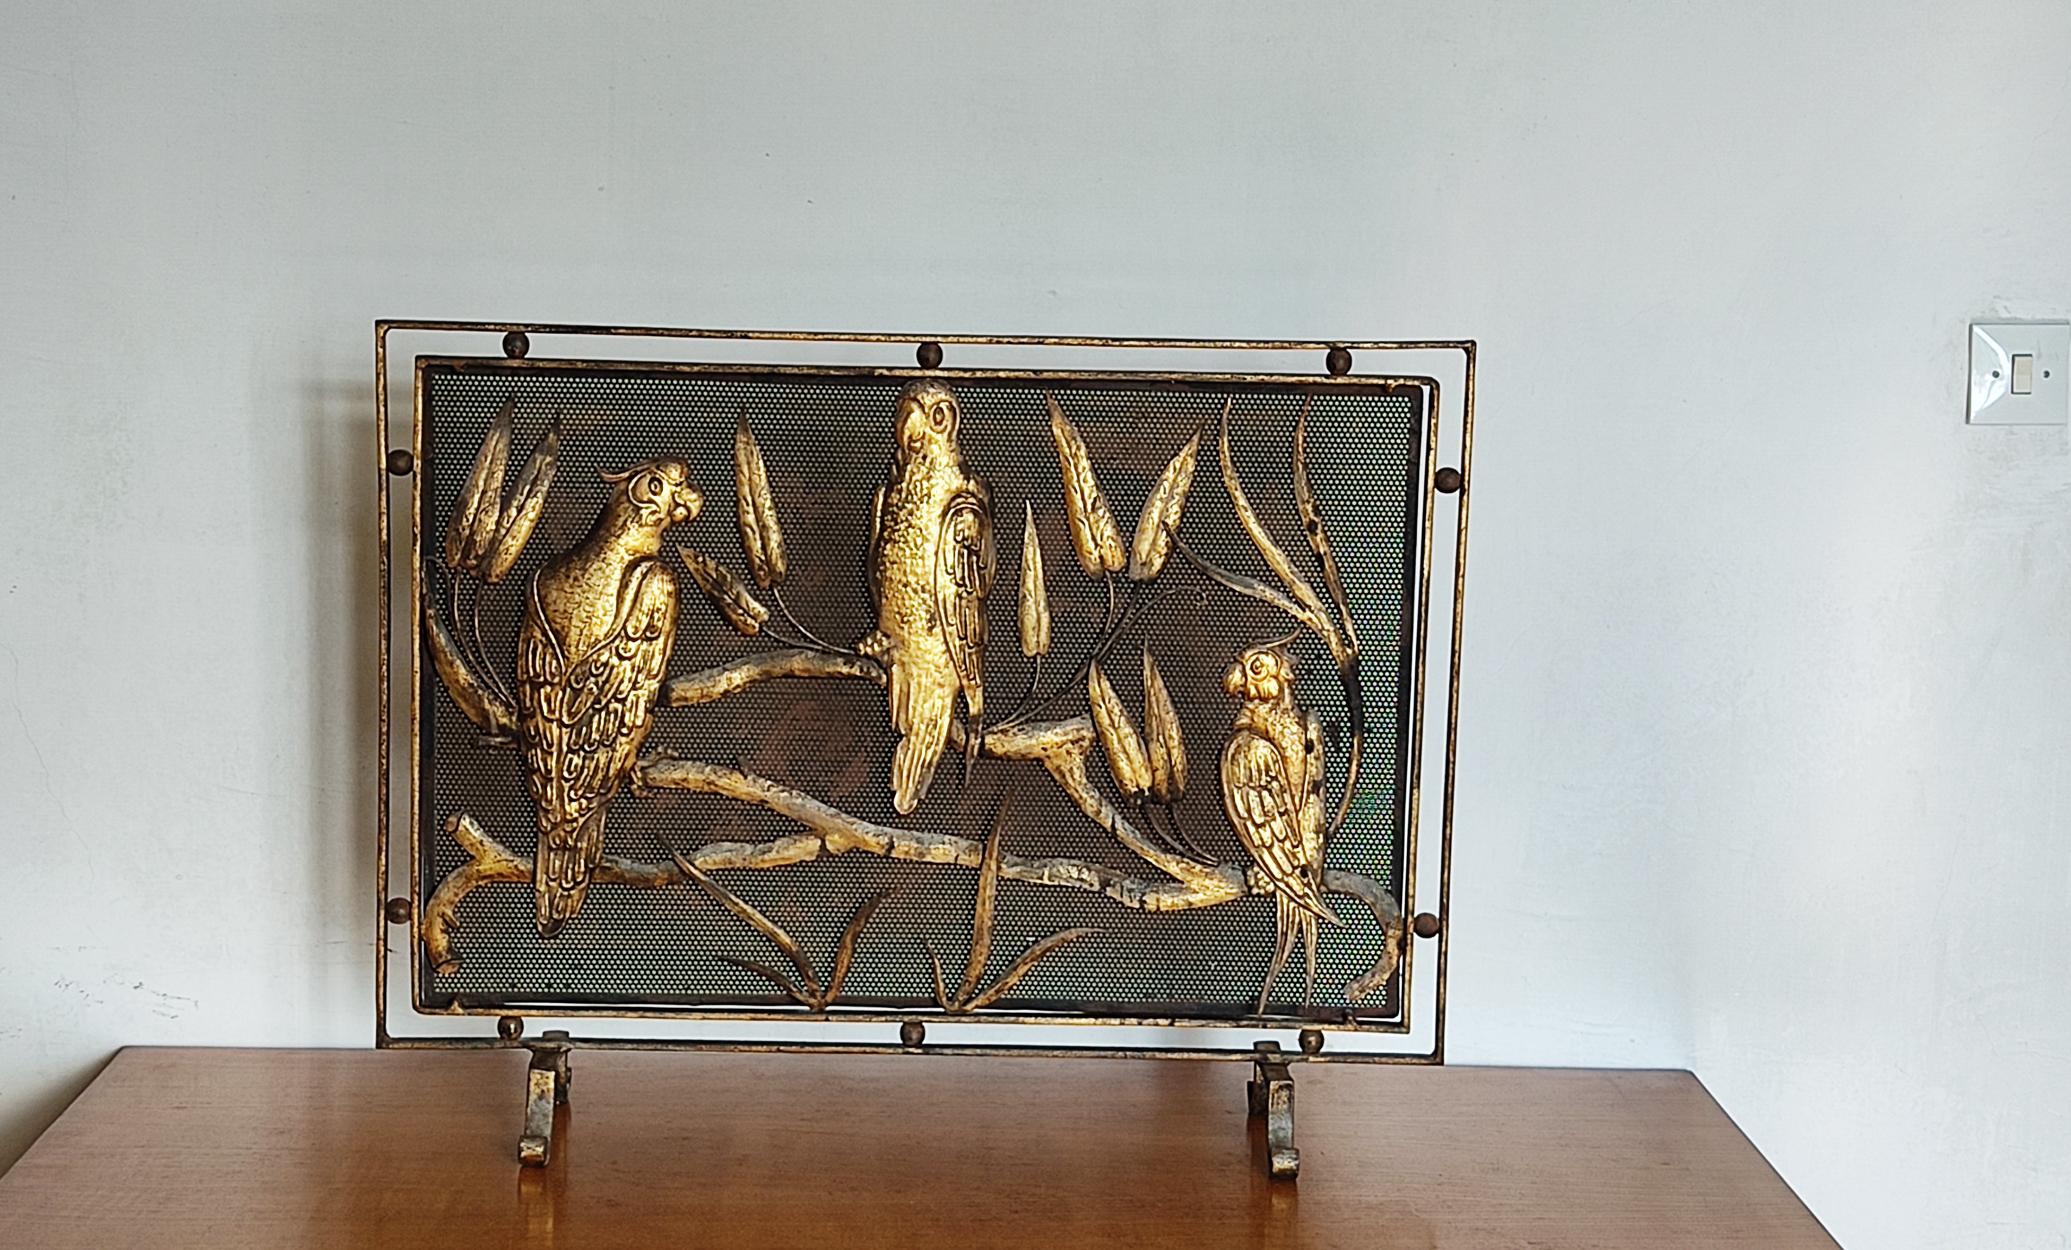 Fire Screen Wrought Iron Whit Parrots The Jungle Exotic, Spain  5